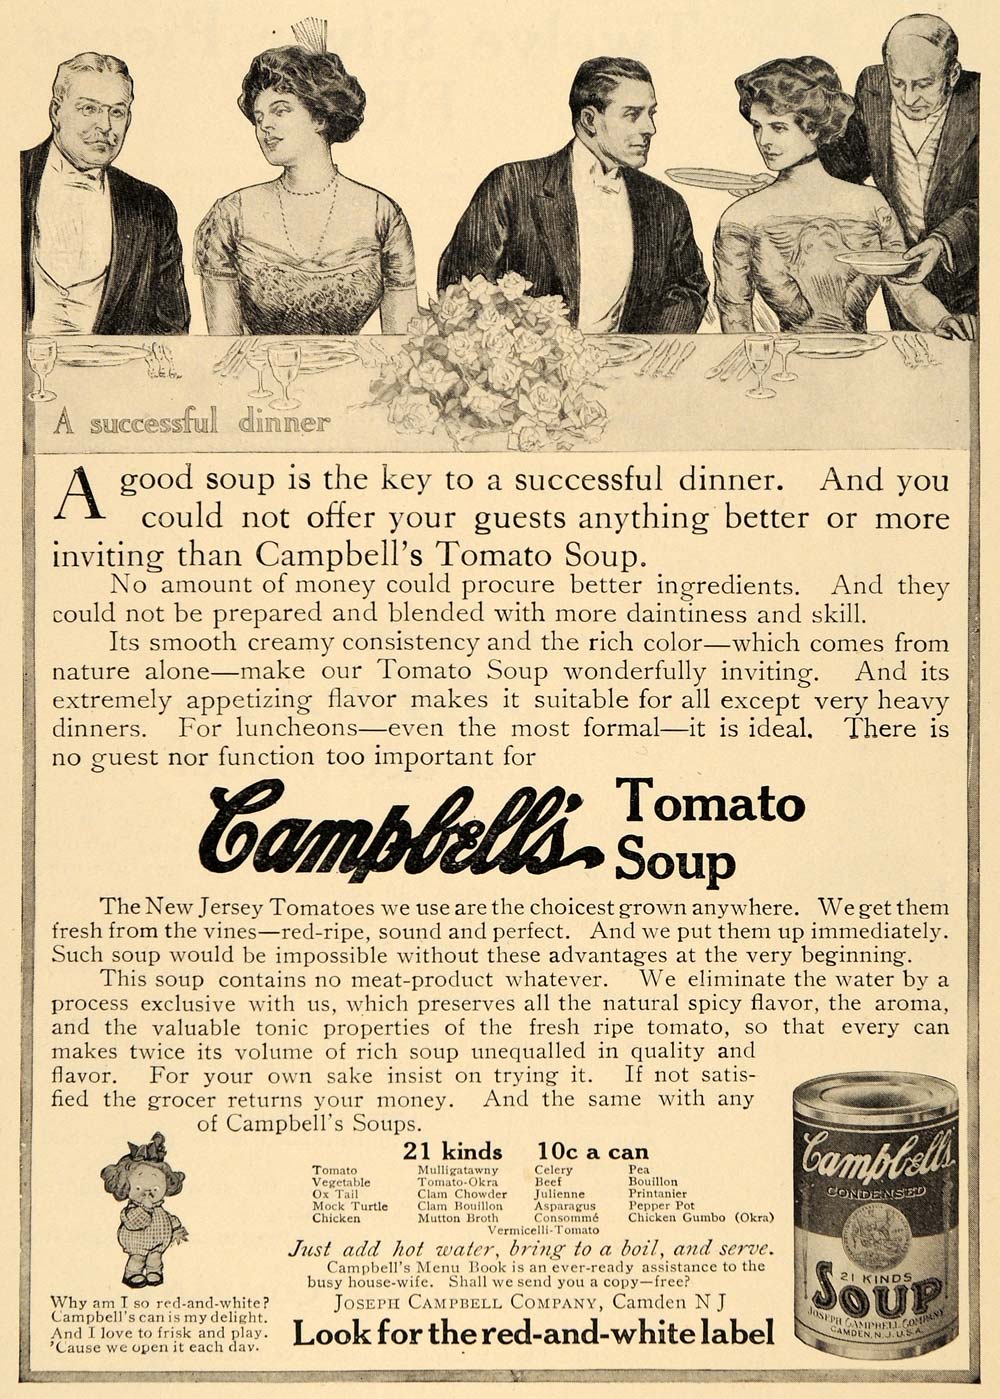 1910 Ad Campbell's Tomato Soup Dinner Party Fashion - ORIGINAL ADVERTISING GH3